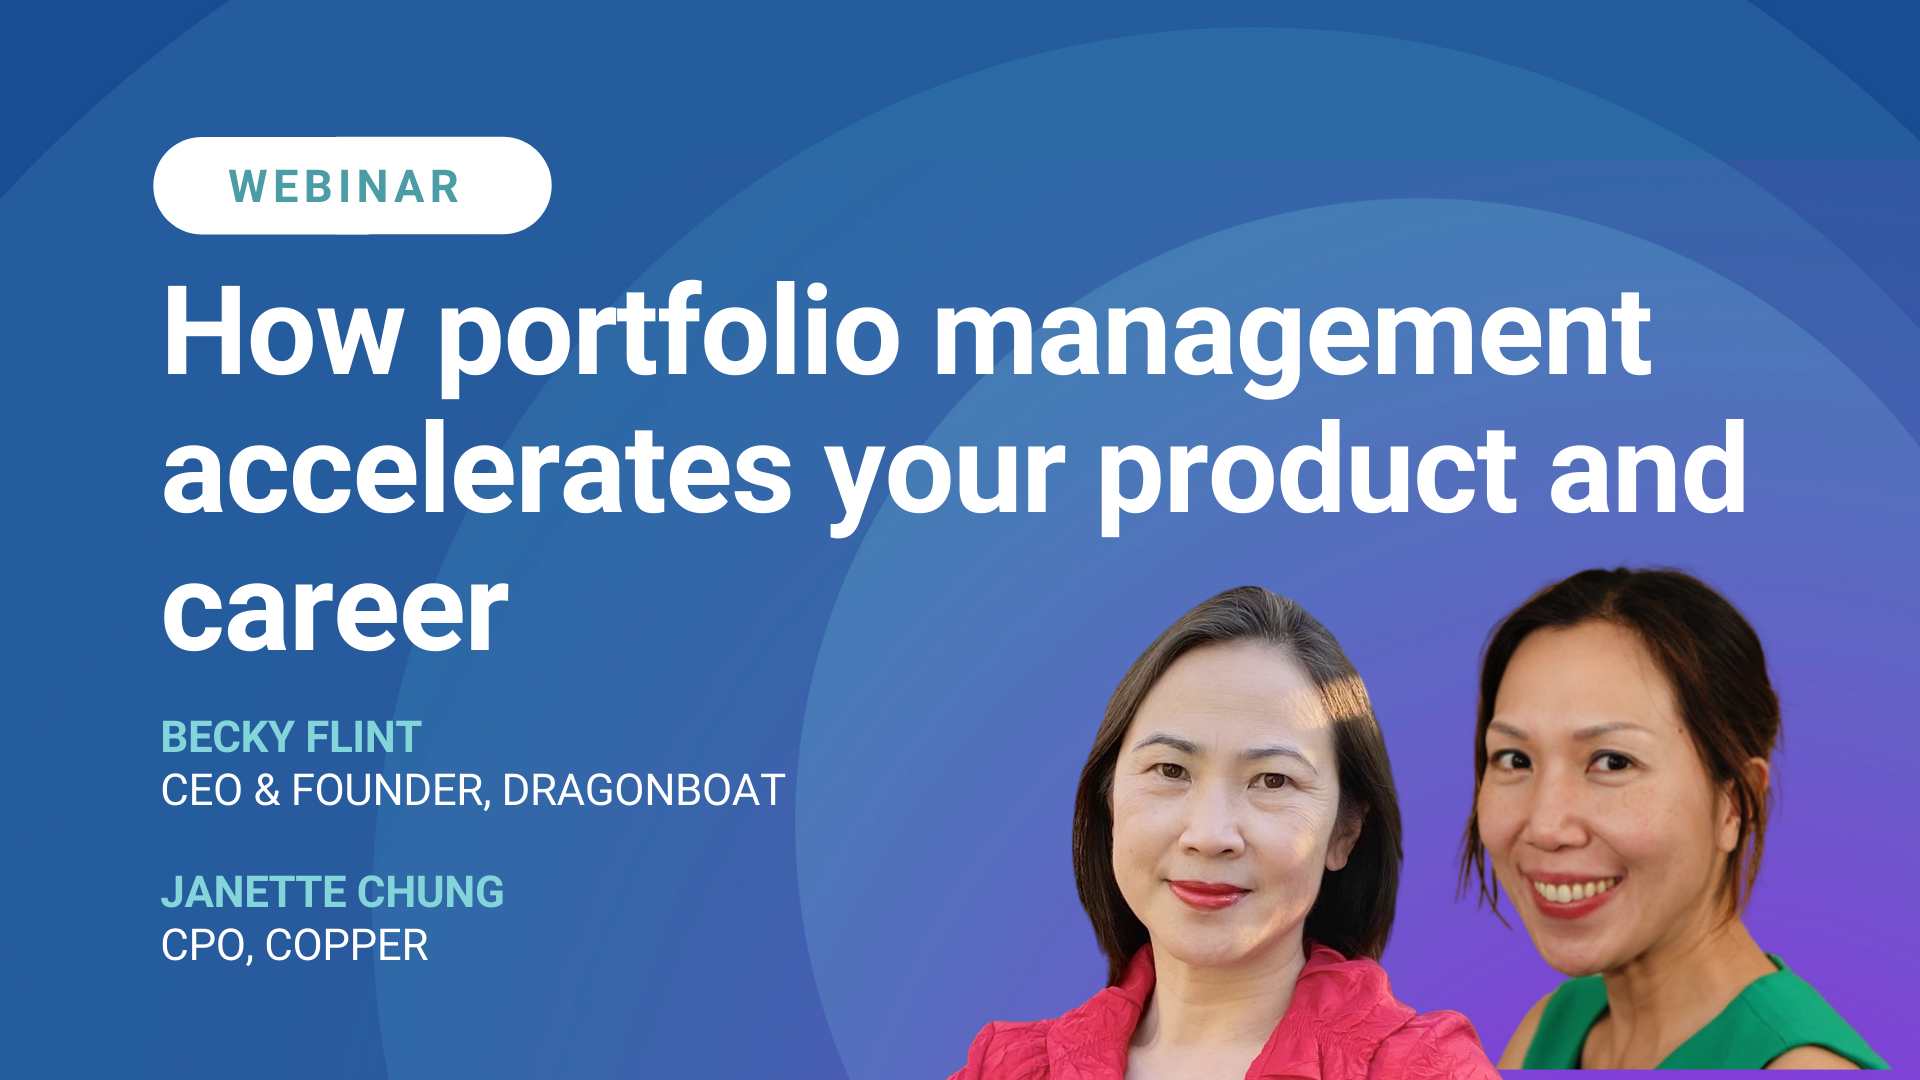 How portfolio management accelerates your product and career